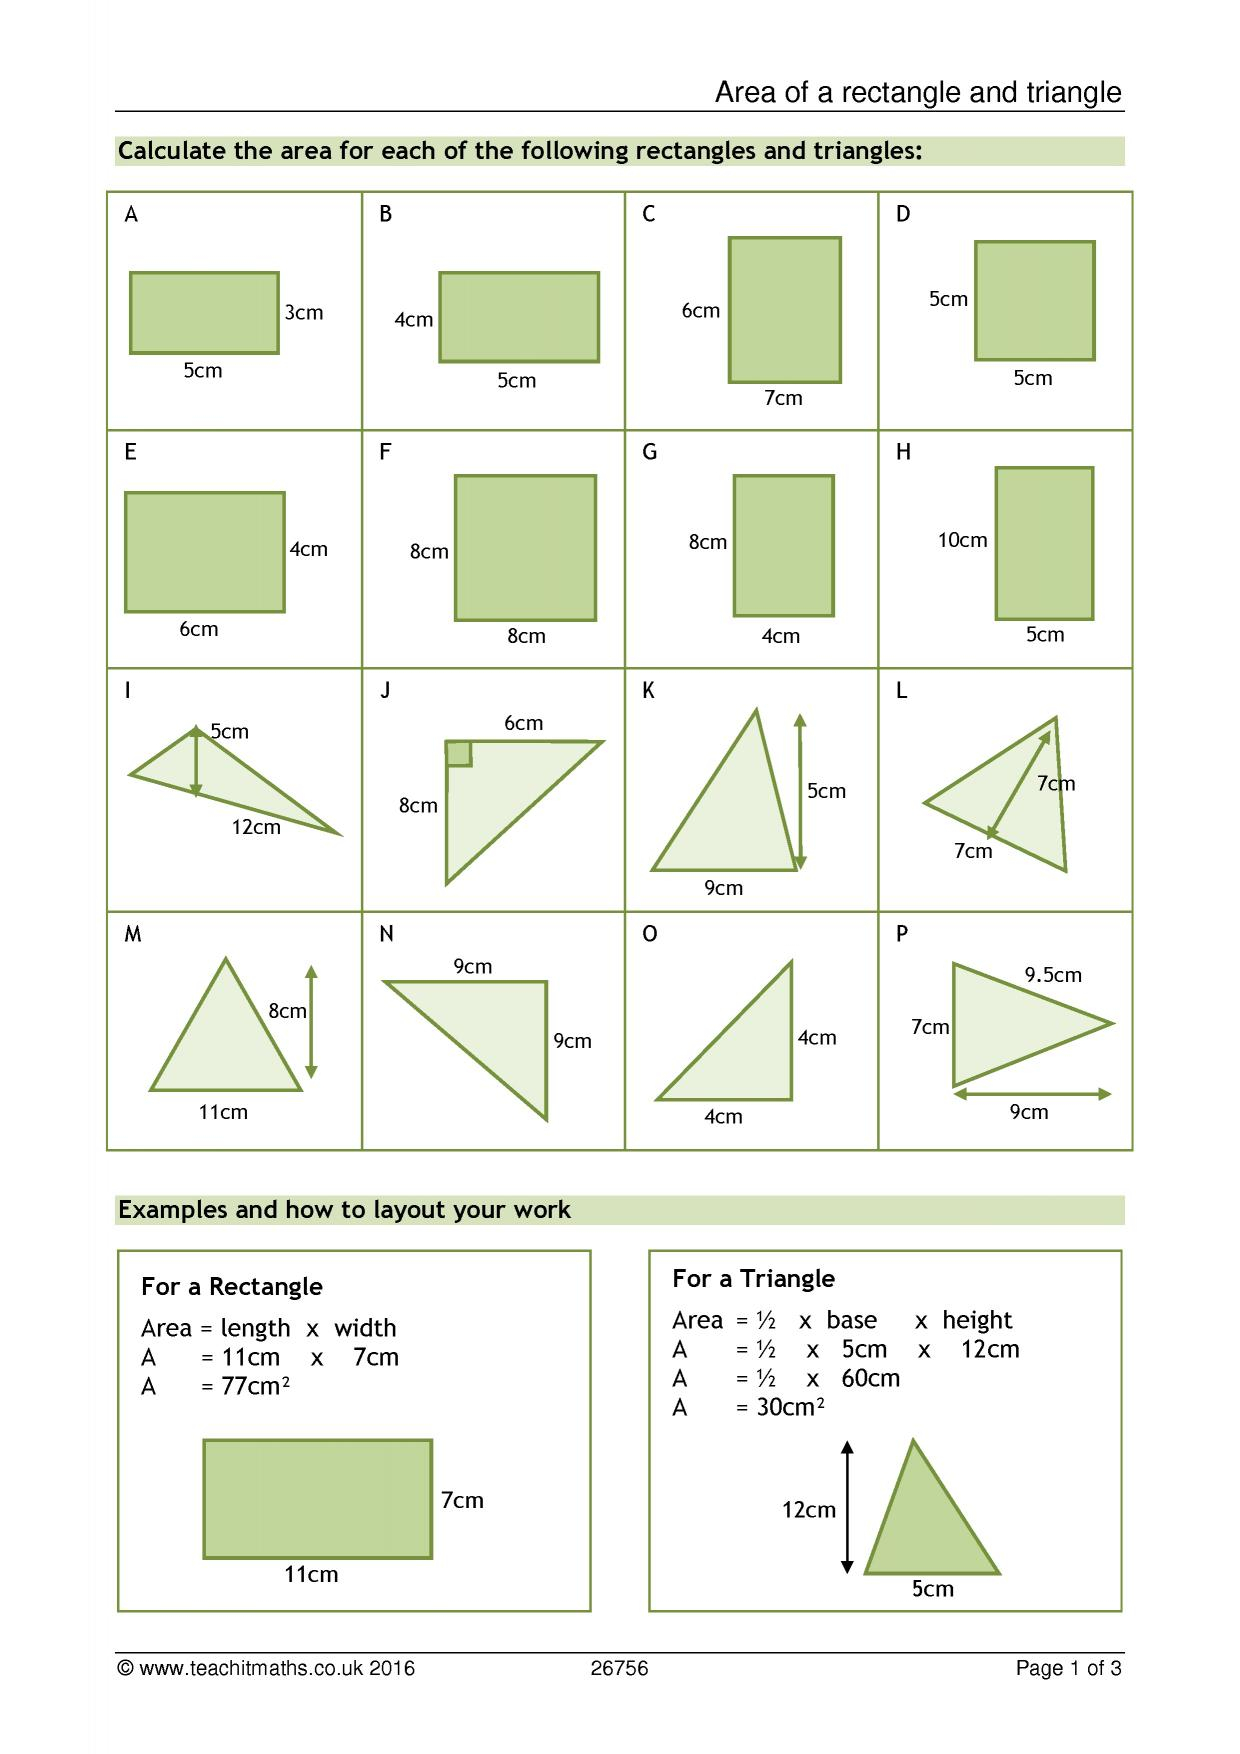 Areas Of Rectangles And Triangles TraingleWorksheets com